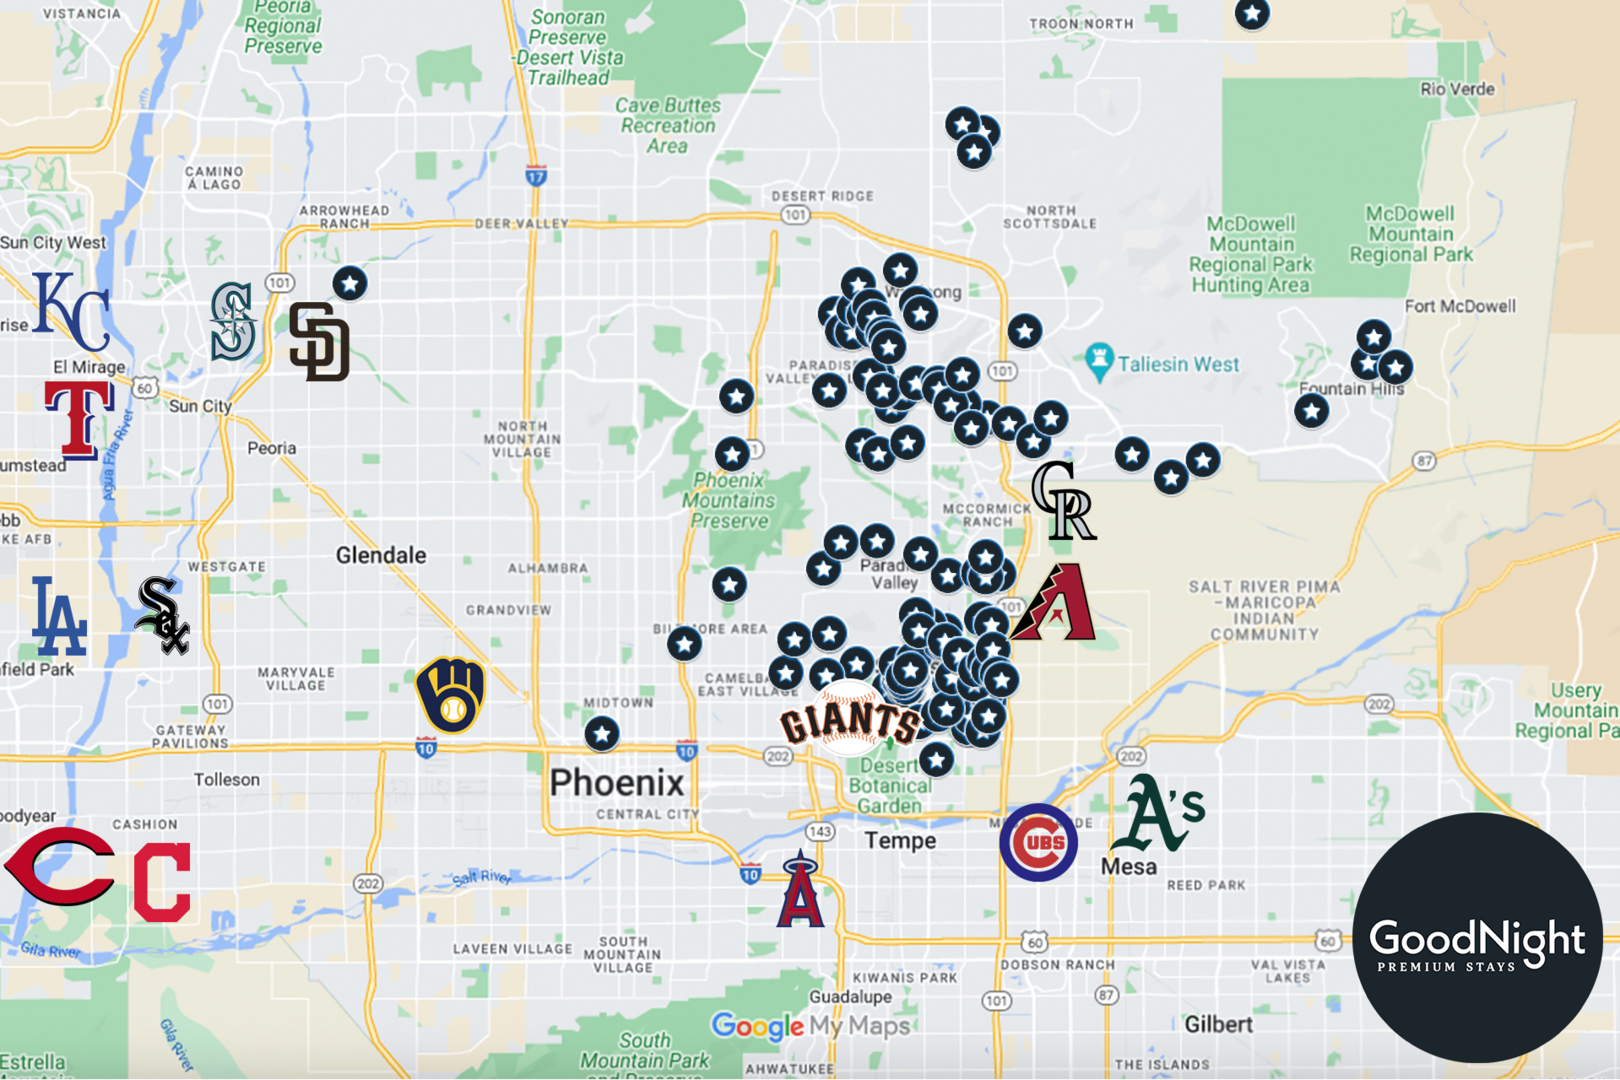 GNS offers homes across the valley that are near your favorite MLB teams during Spring Training! This home is closest to Tempe Diablo Stadium & Sloan Park!